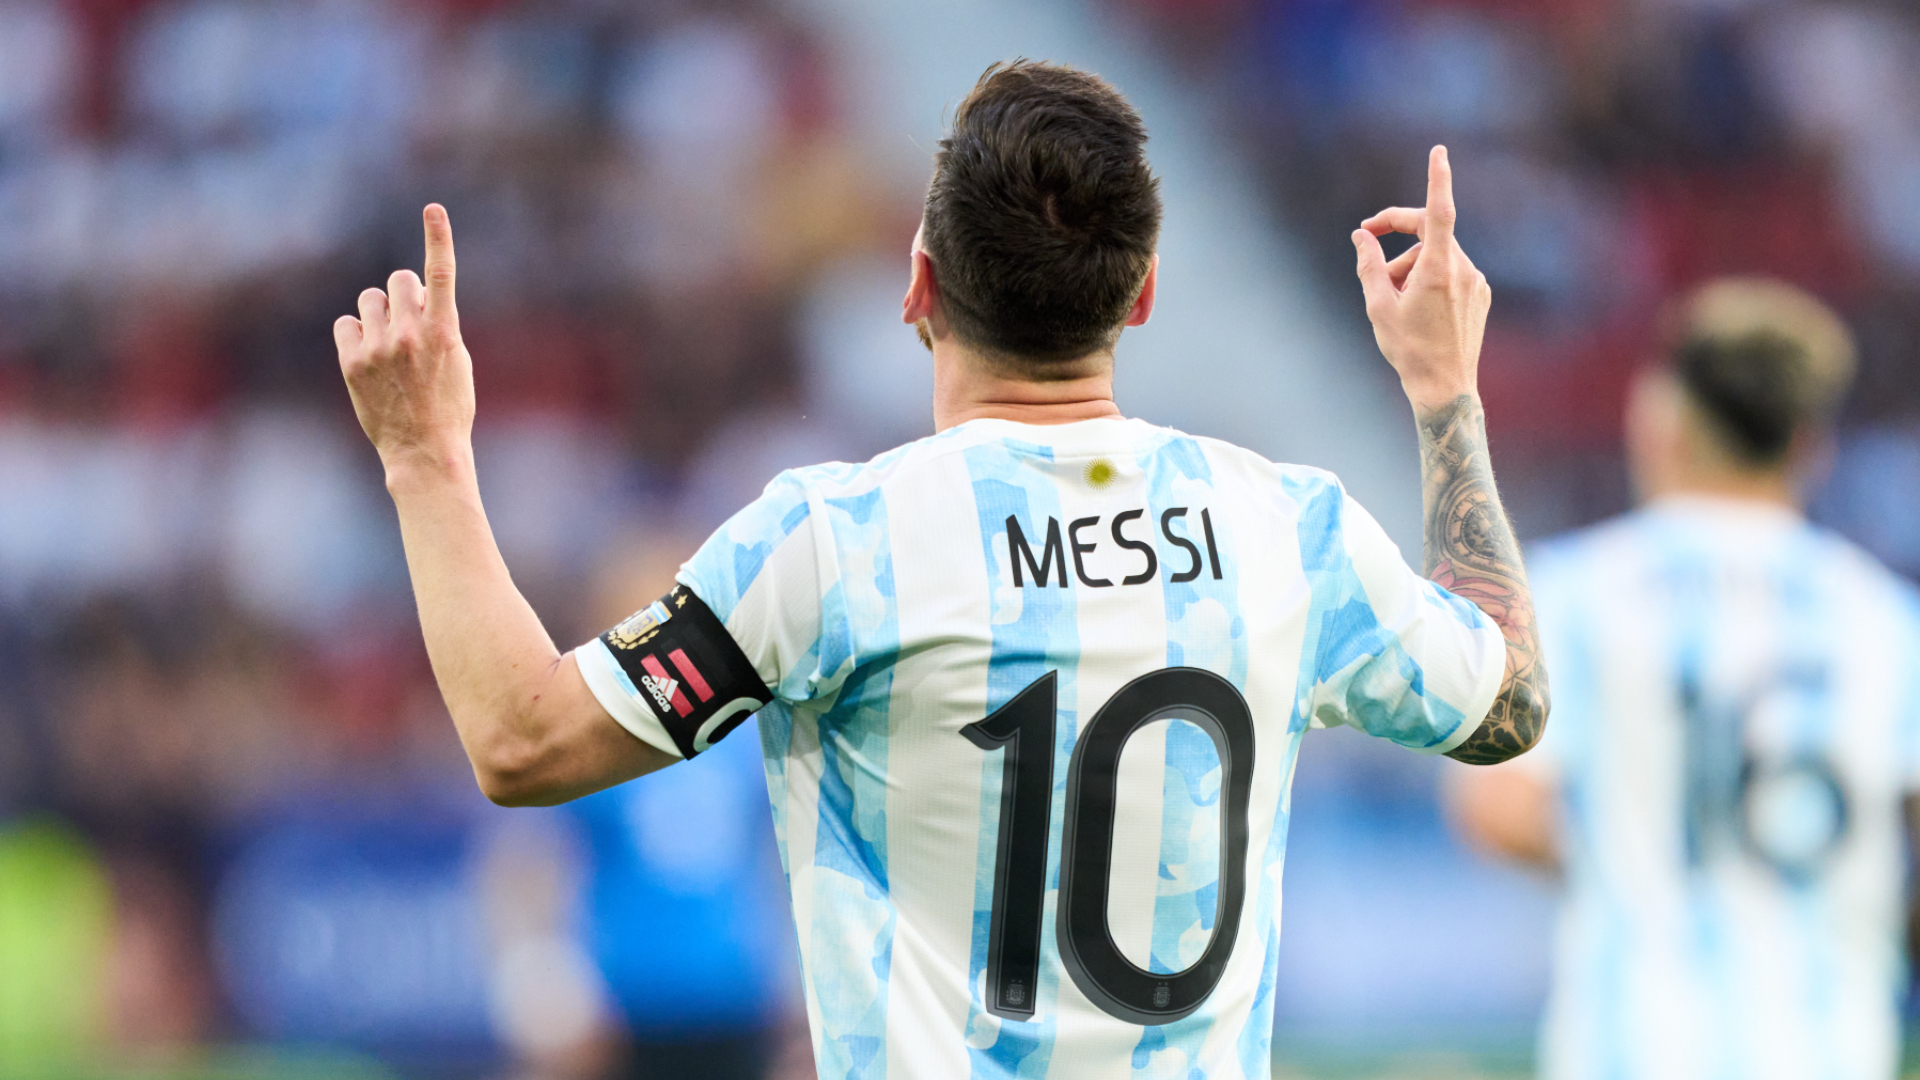 Messi may go to another World Cup after Qatar 2022, says Scaloni